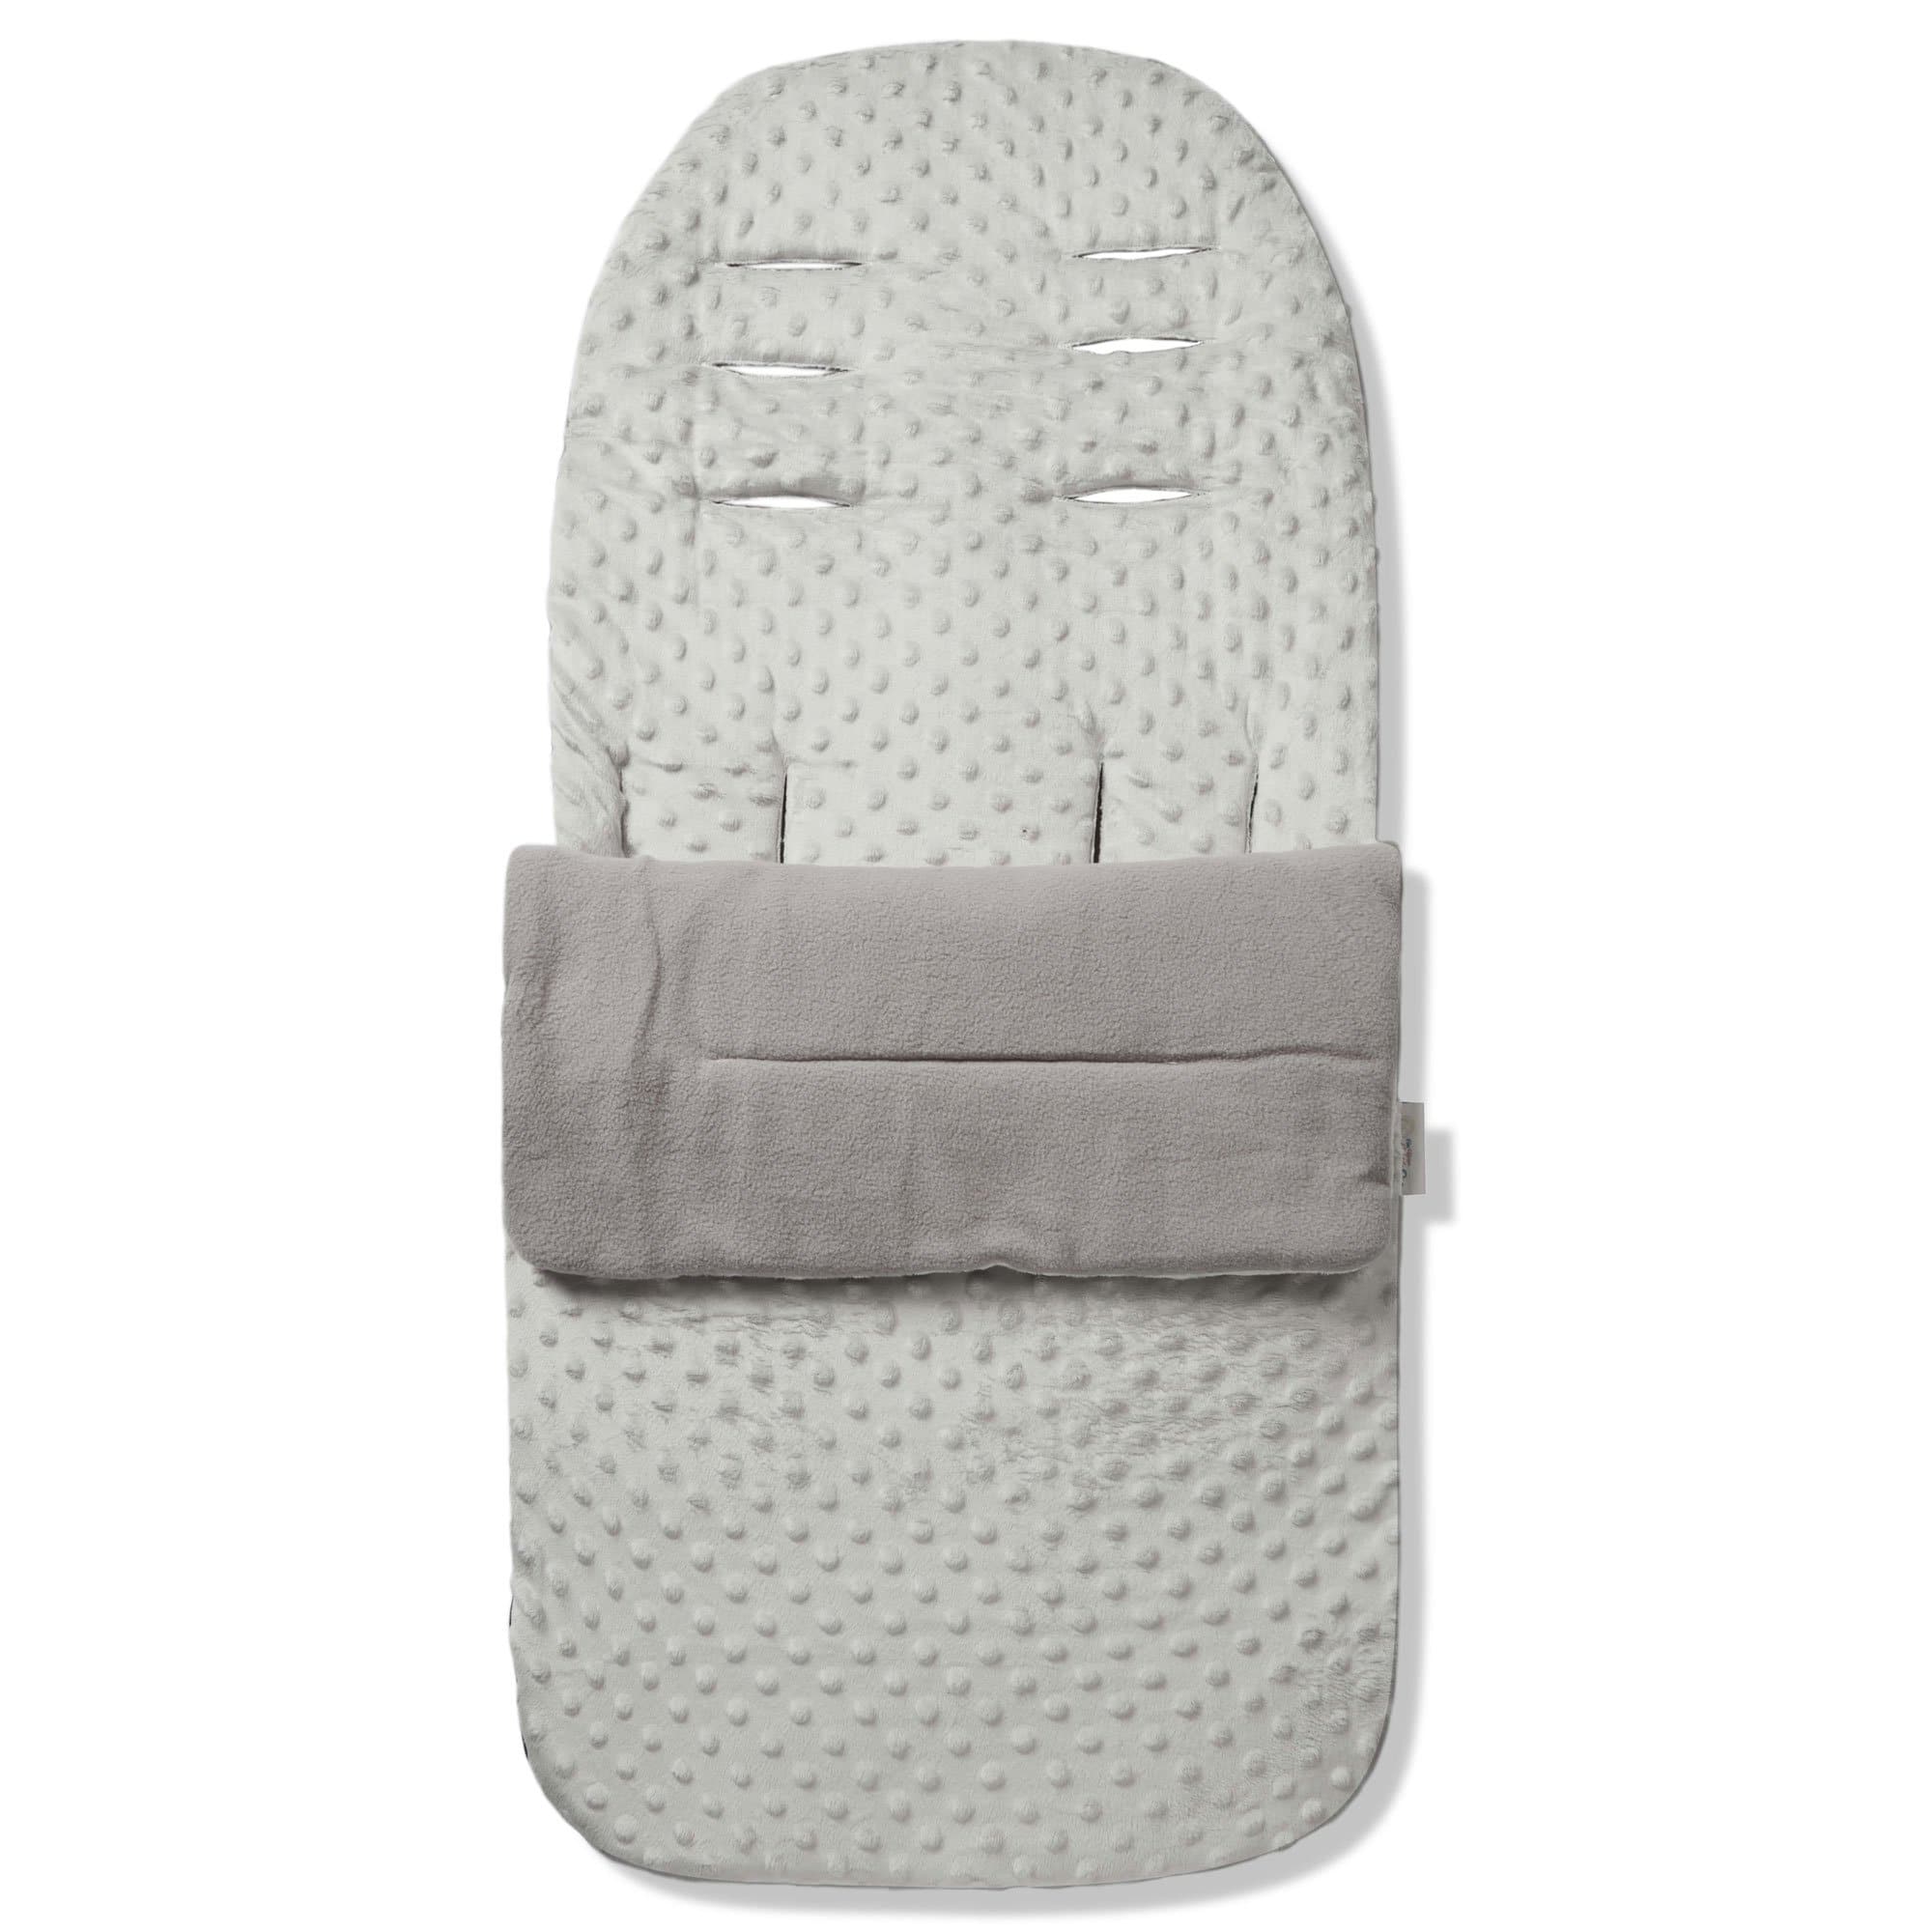 Dimple Footmuff / Cosy Toes Compatible with Hybrid - Grey / Fits All Models | For Your Little One